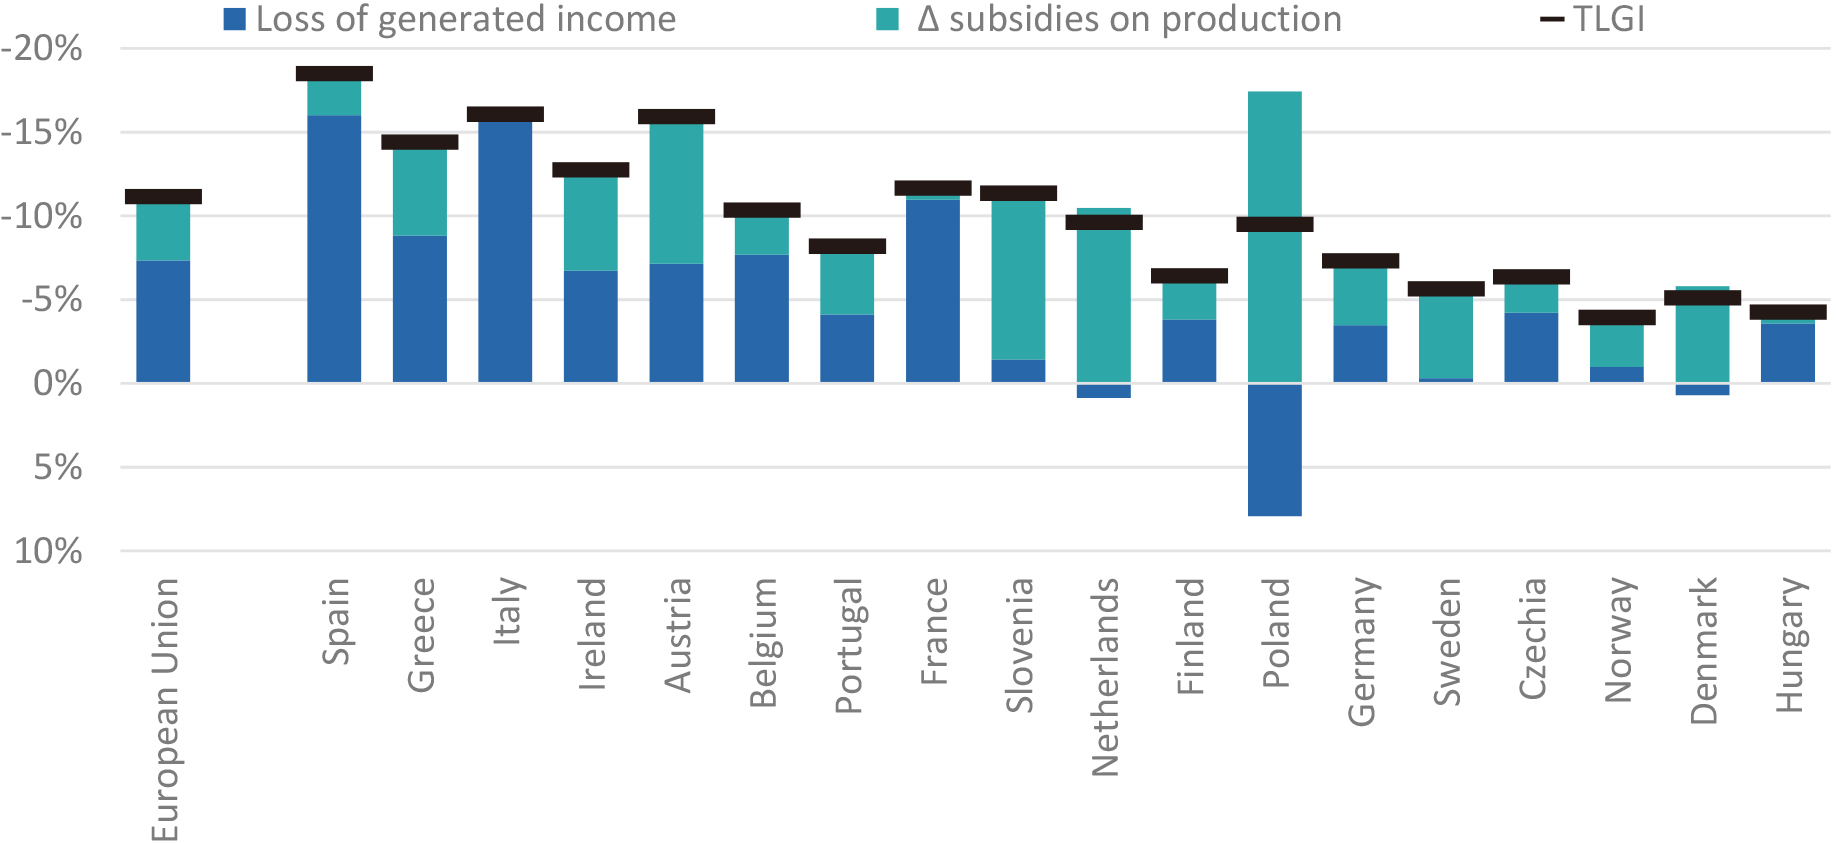 Loss of generated income and theoretical loss of generated income, 2020 second quarter. Notes: The actual and the theoretical losses of generated income, and the change of subsidies on production are expressed as percentages of 2019 generated income. Countries are sorted by decreasing values of LGI. Source: elaboration based on data provided by countries [8, vintage April 2022].